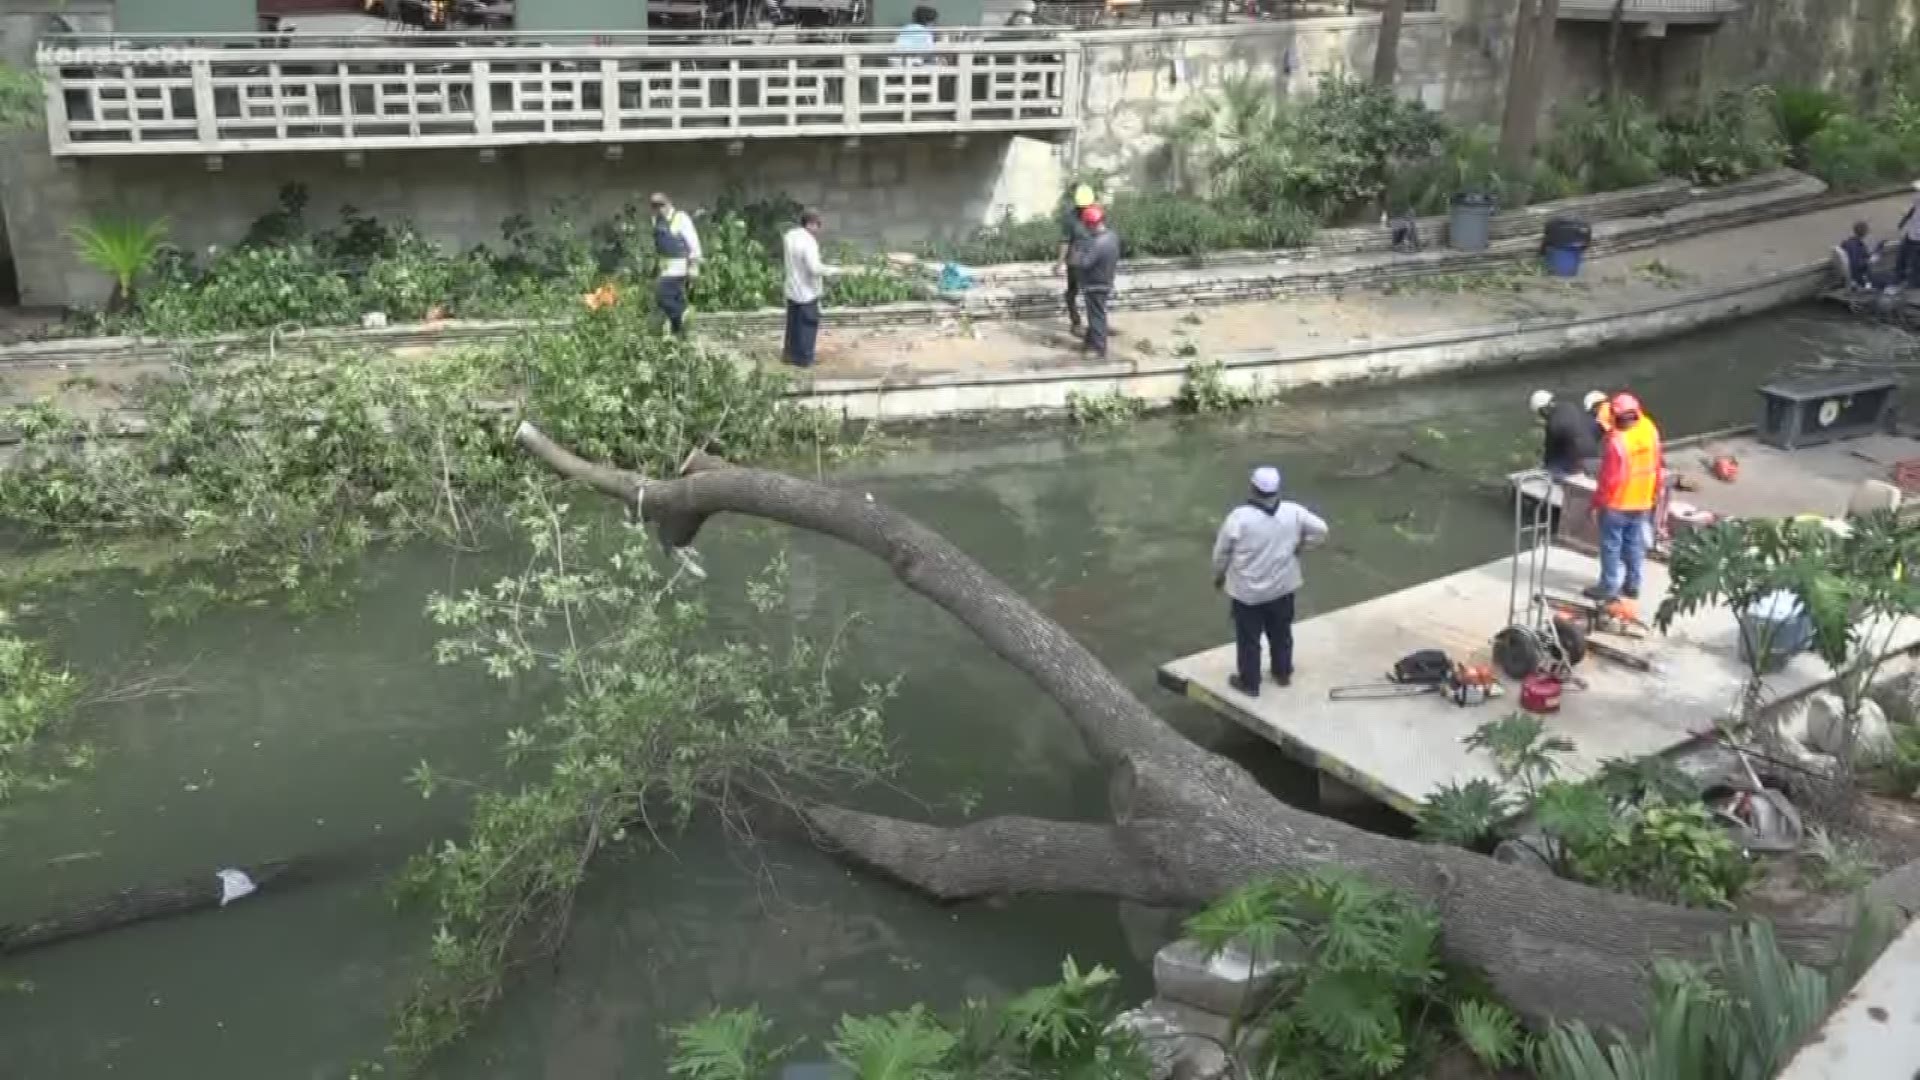 No one was injured when the tree fell over near the Houston Street Bridge, narrowly missing some folks having lunch.